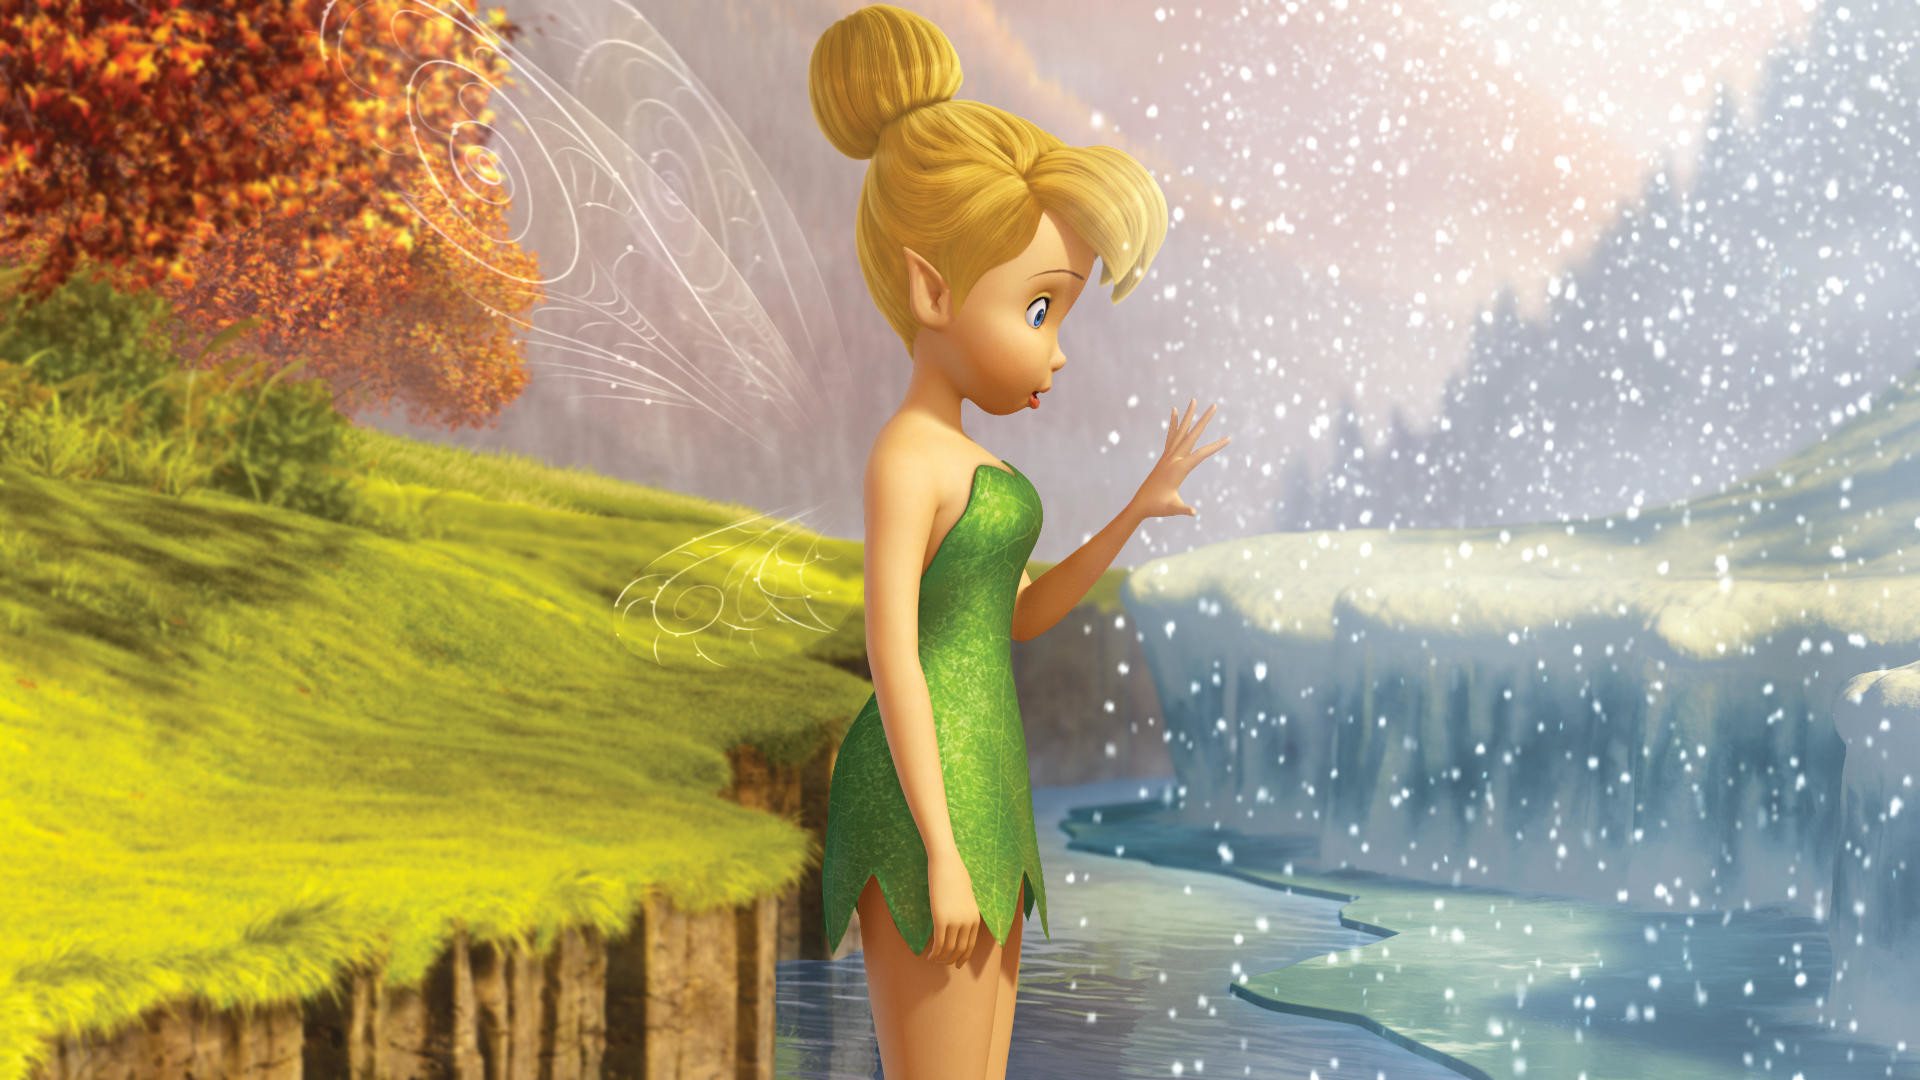 1920x1080 Tinkerbell & the Mysterious Winter Woods Wallpaper: TinkerBell Secret Of  The Wings